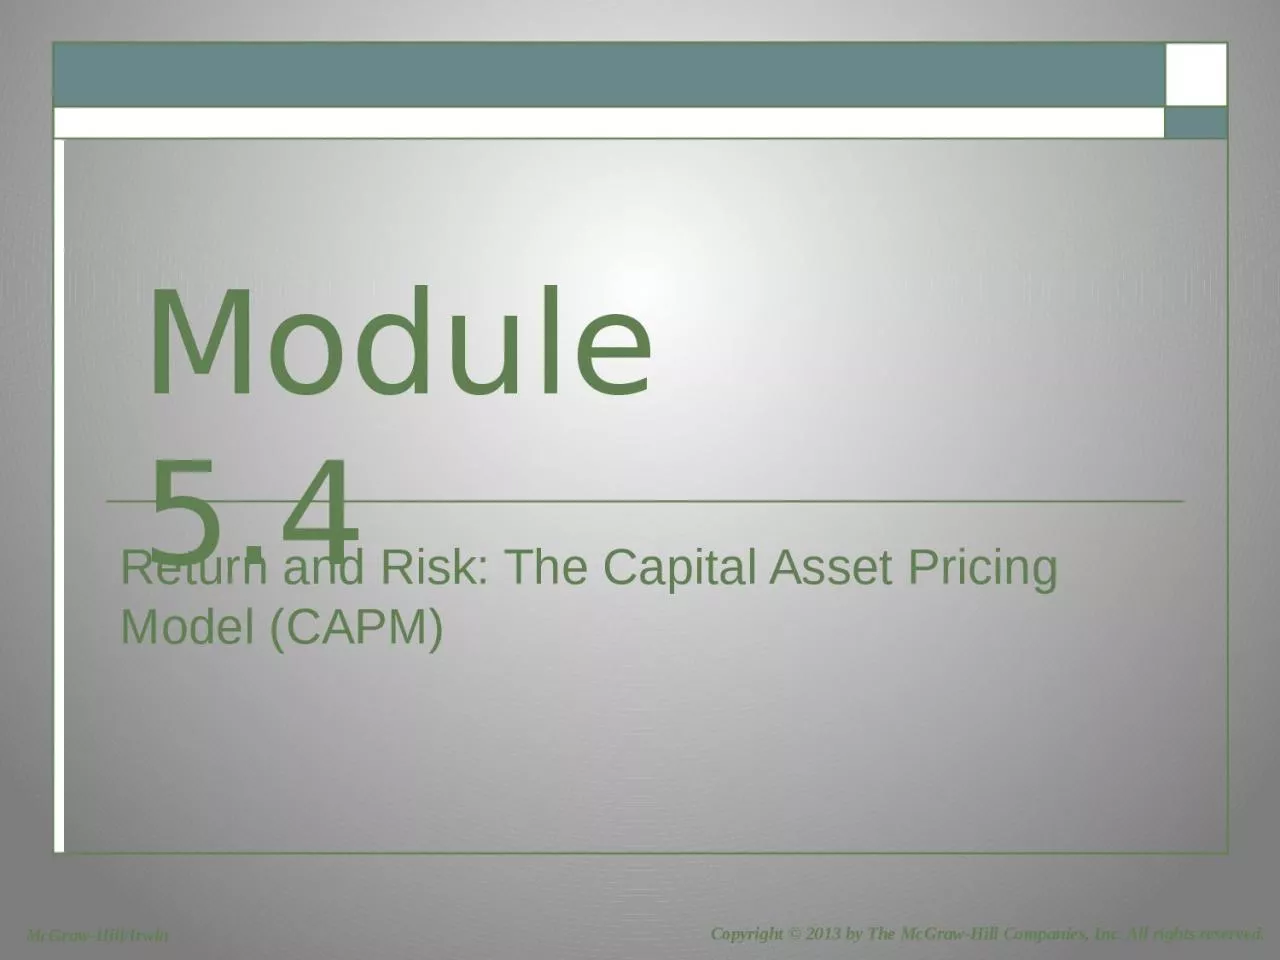 Return and Risk: The Capital Asset Pricing Model (CAPM)